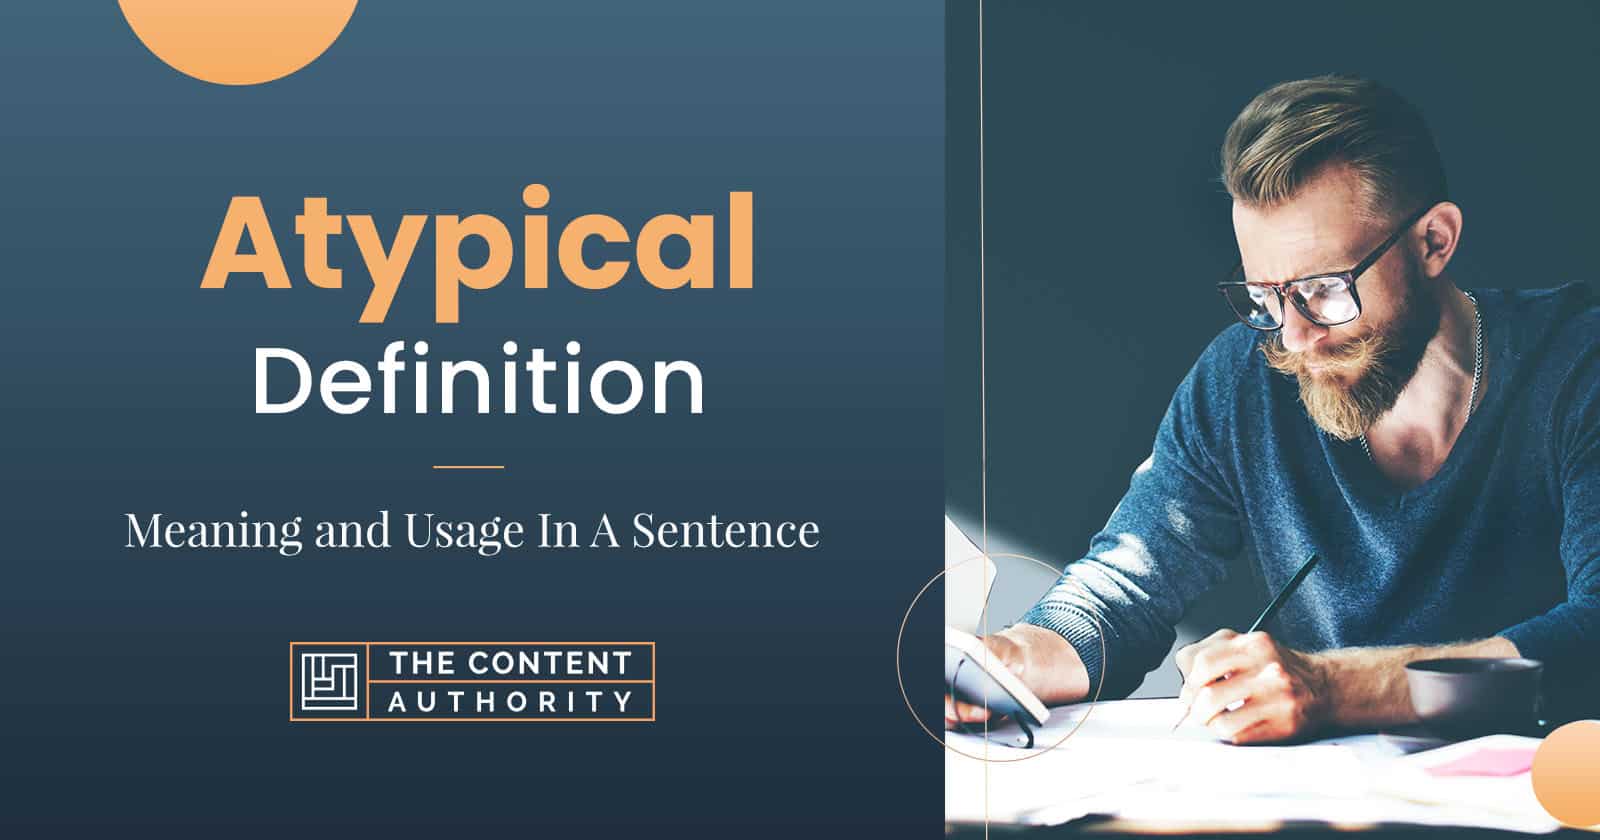 Atypical Definition – Meaning and Usage In A Sentence